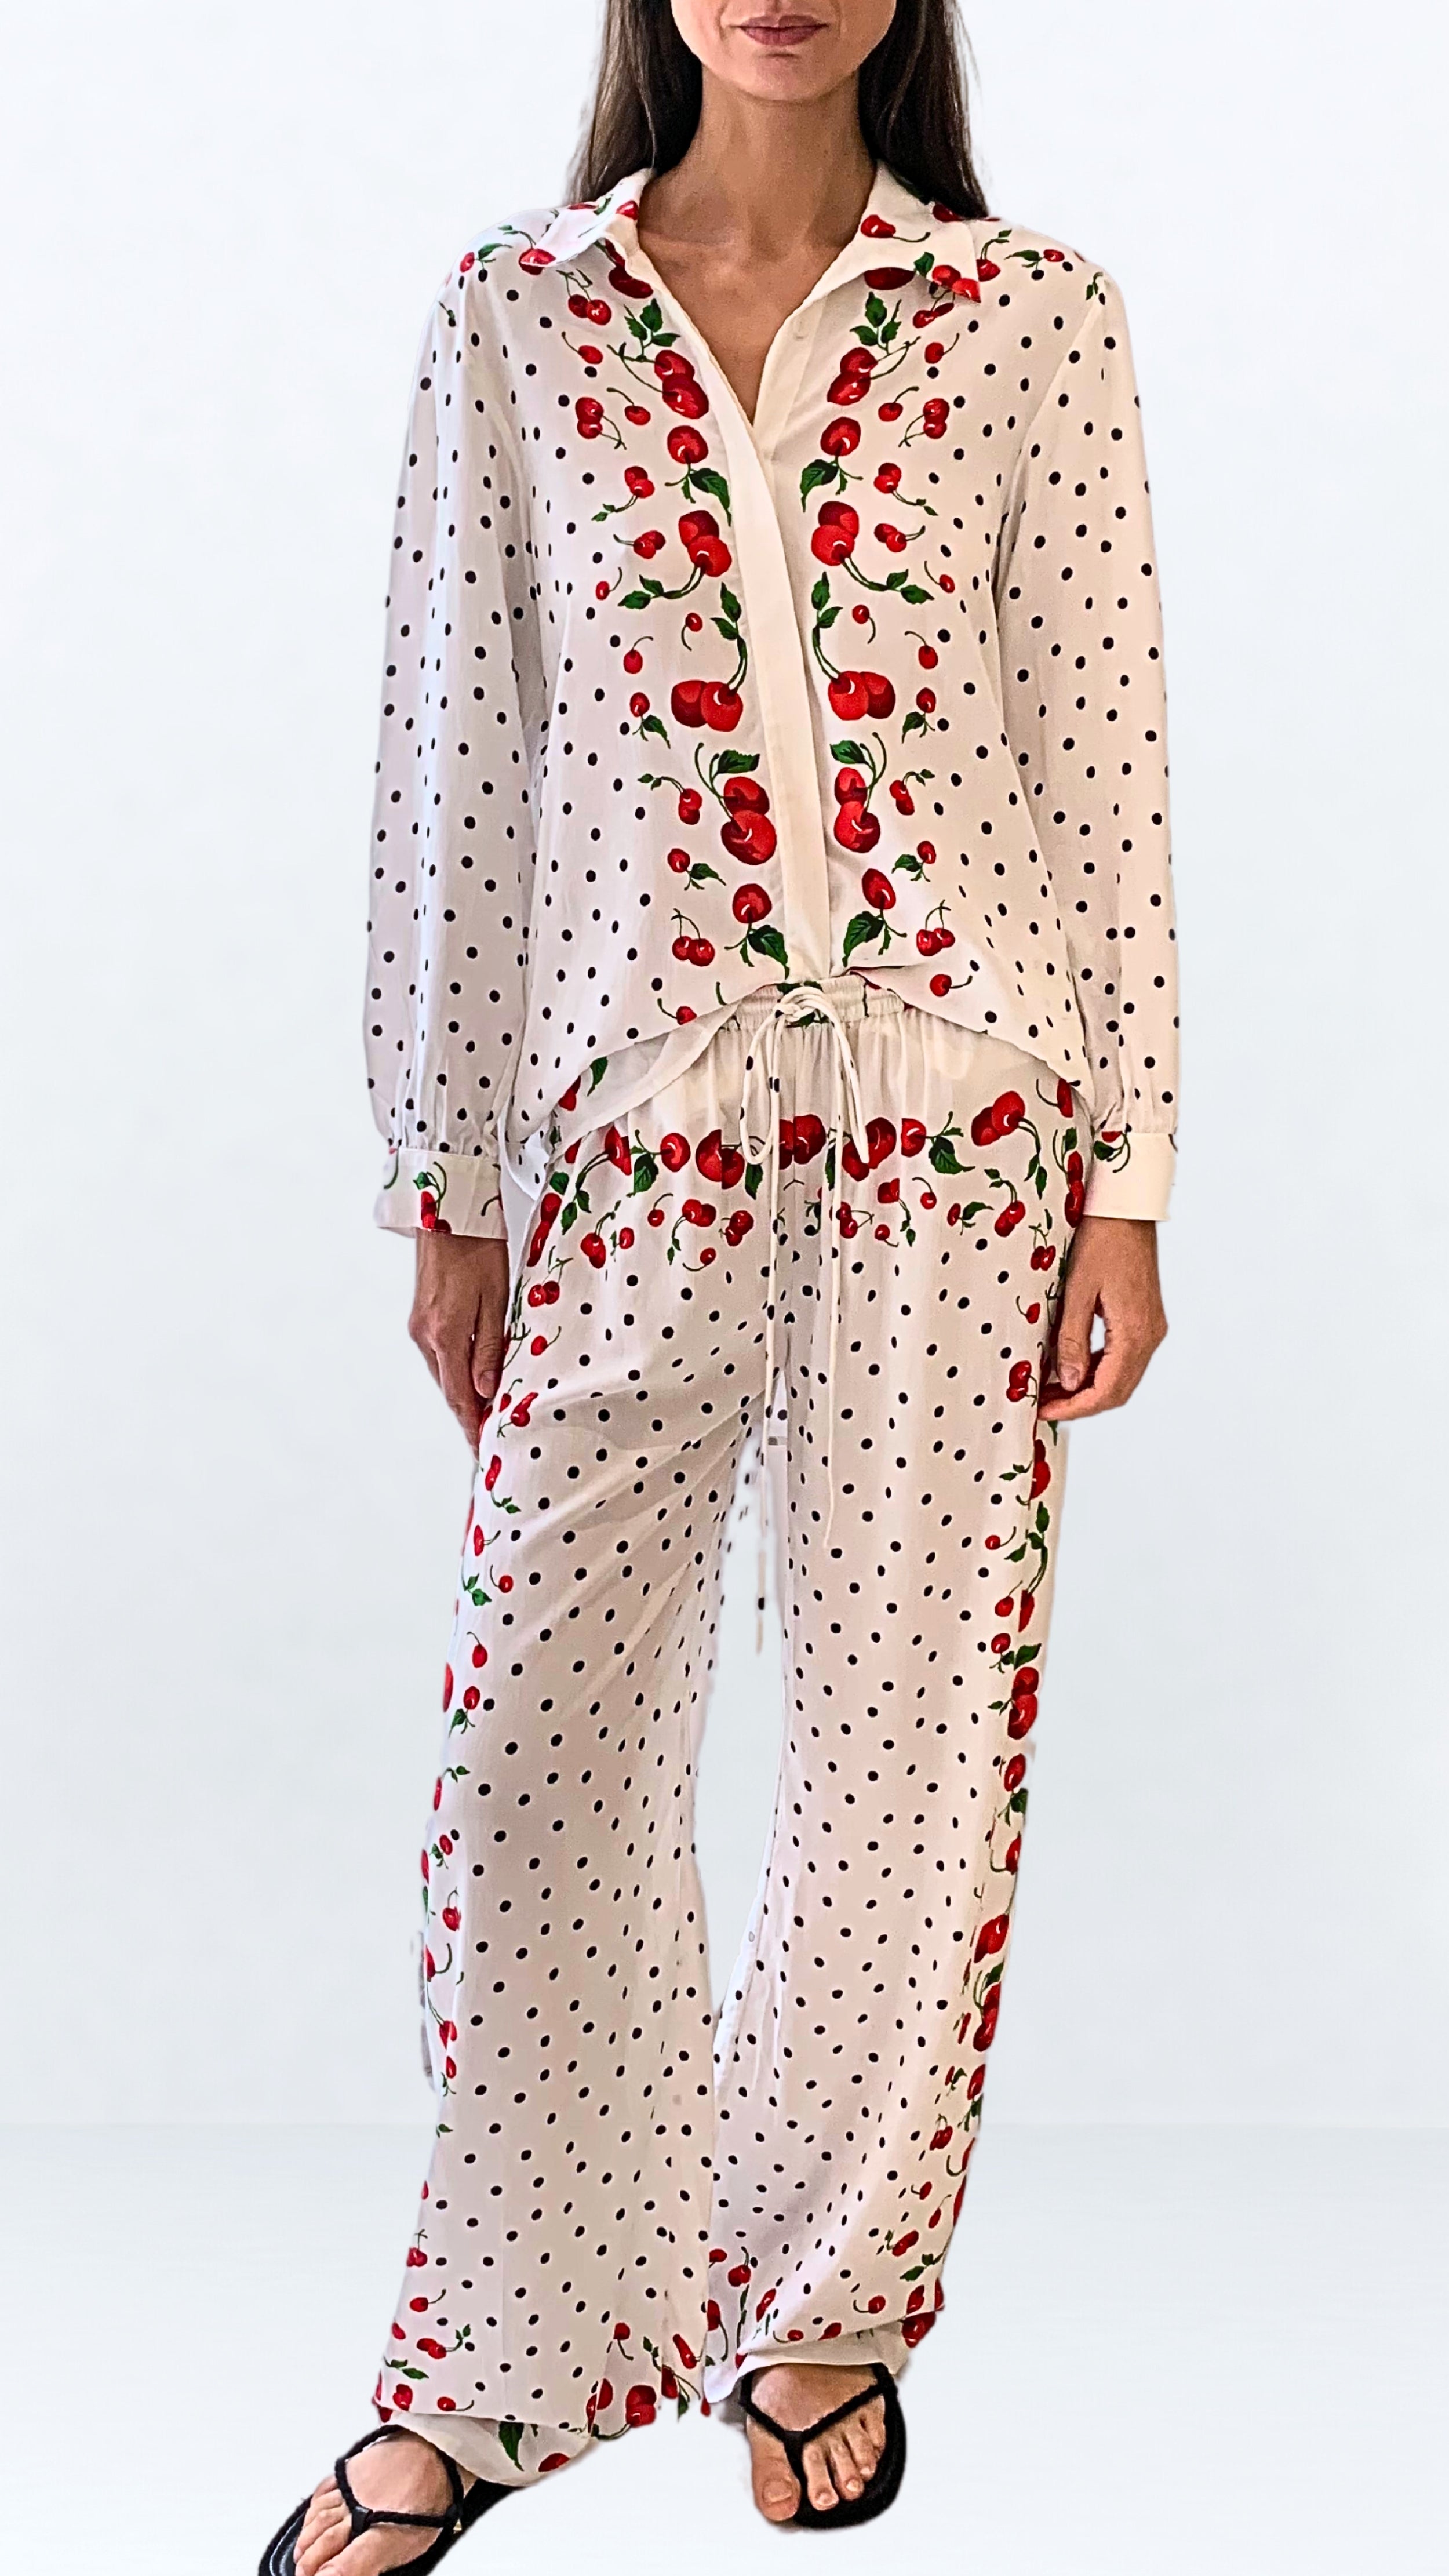 Leslie Amon Jaw String Cherry Pants. White drawstring loose fitting pants with an original cherry and polka dot print. Adjust waist. Shown on model facing front.